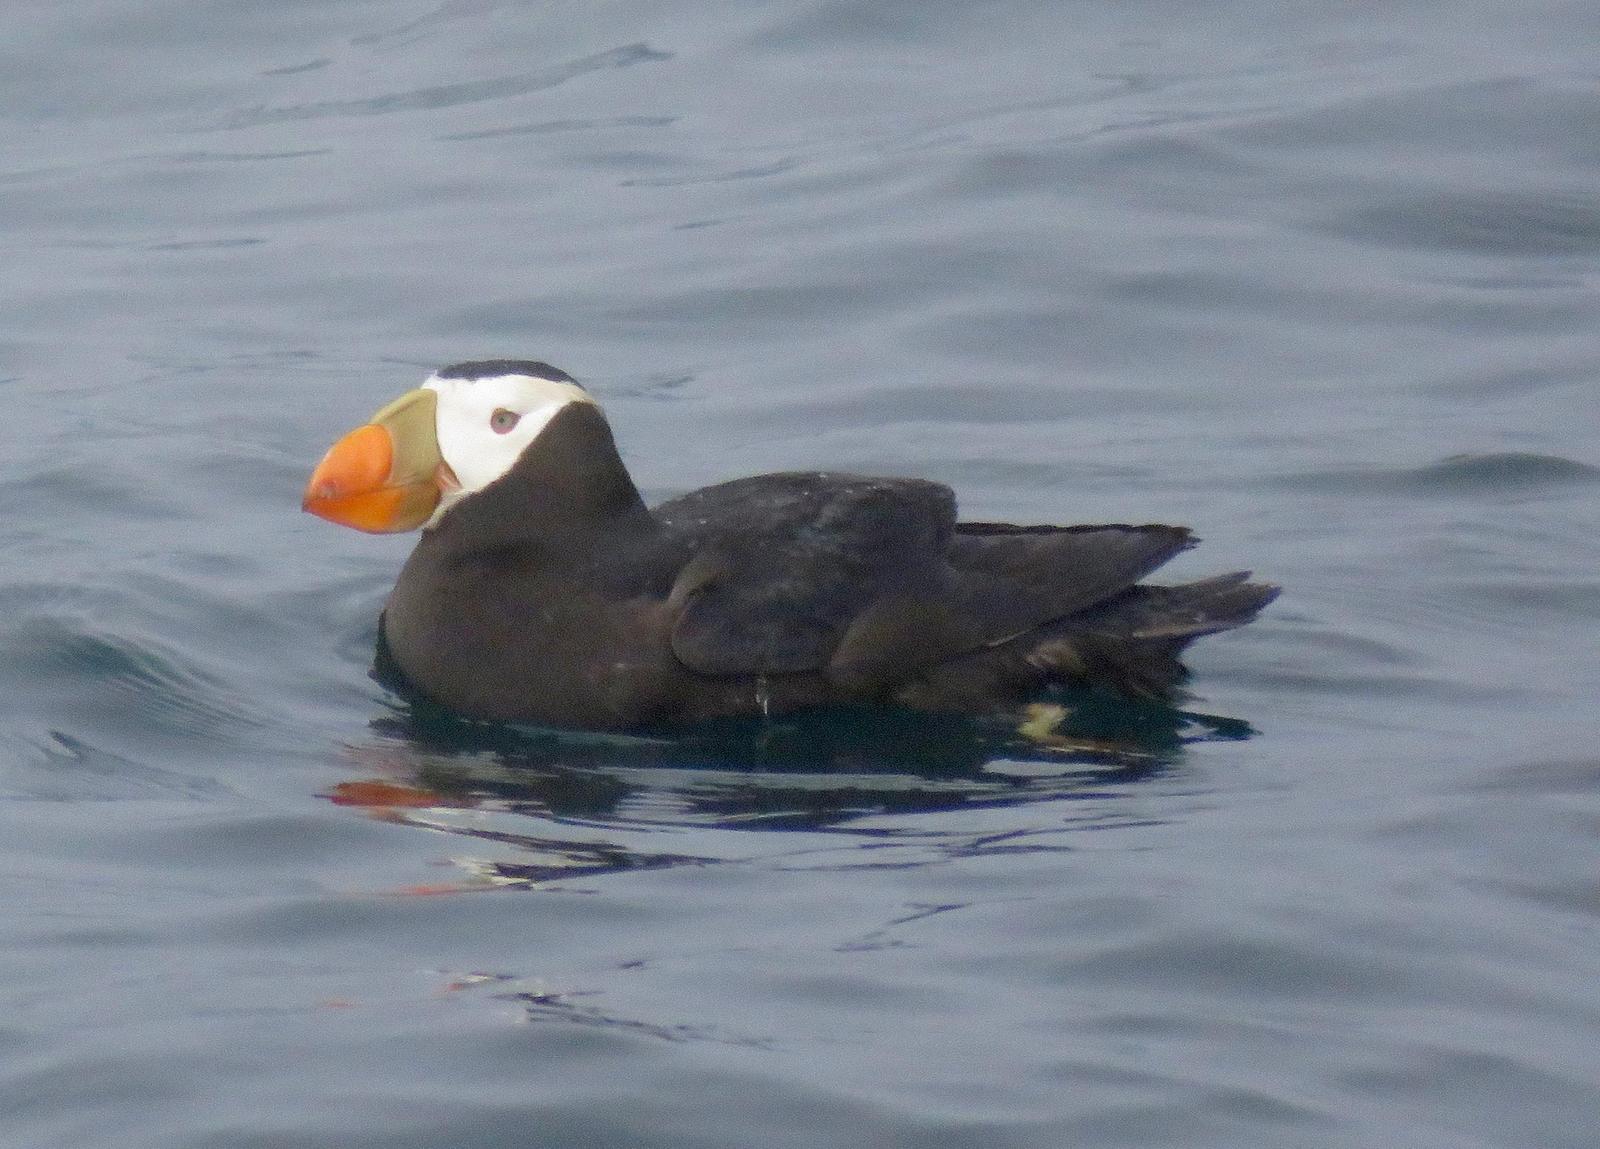 Tufted Puffin Photo by Don Glasco